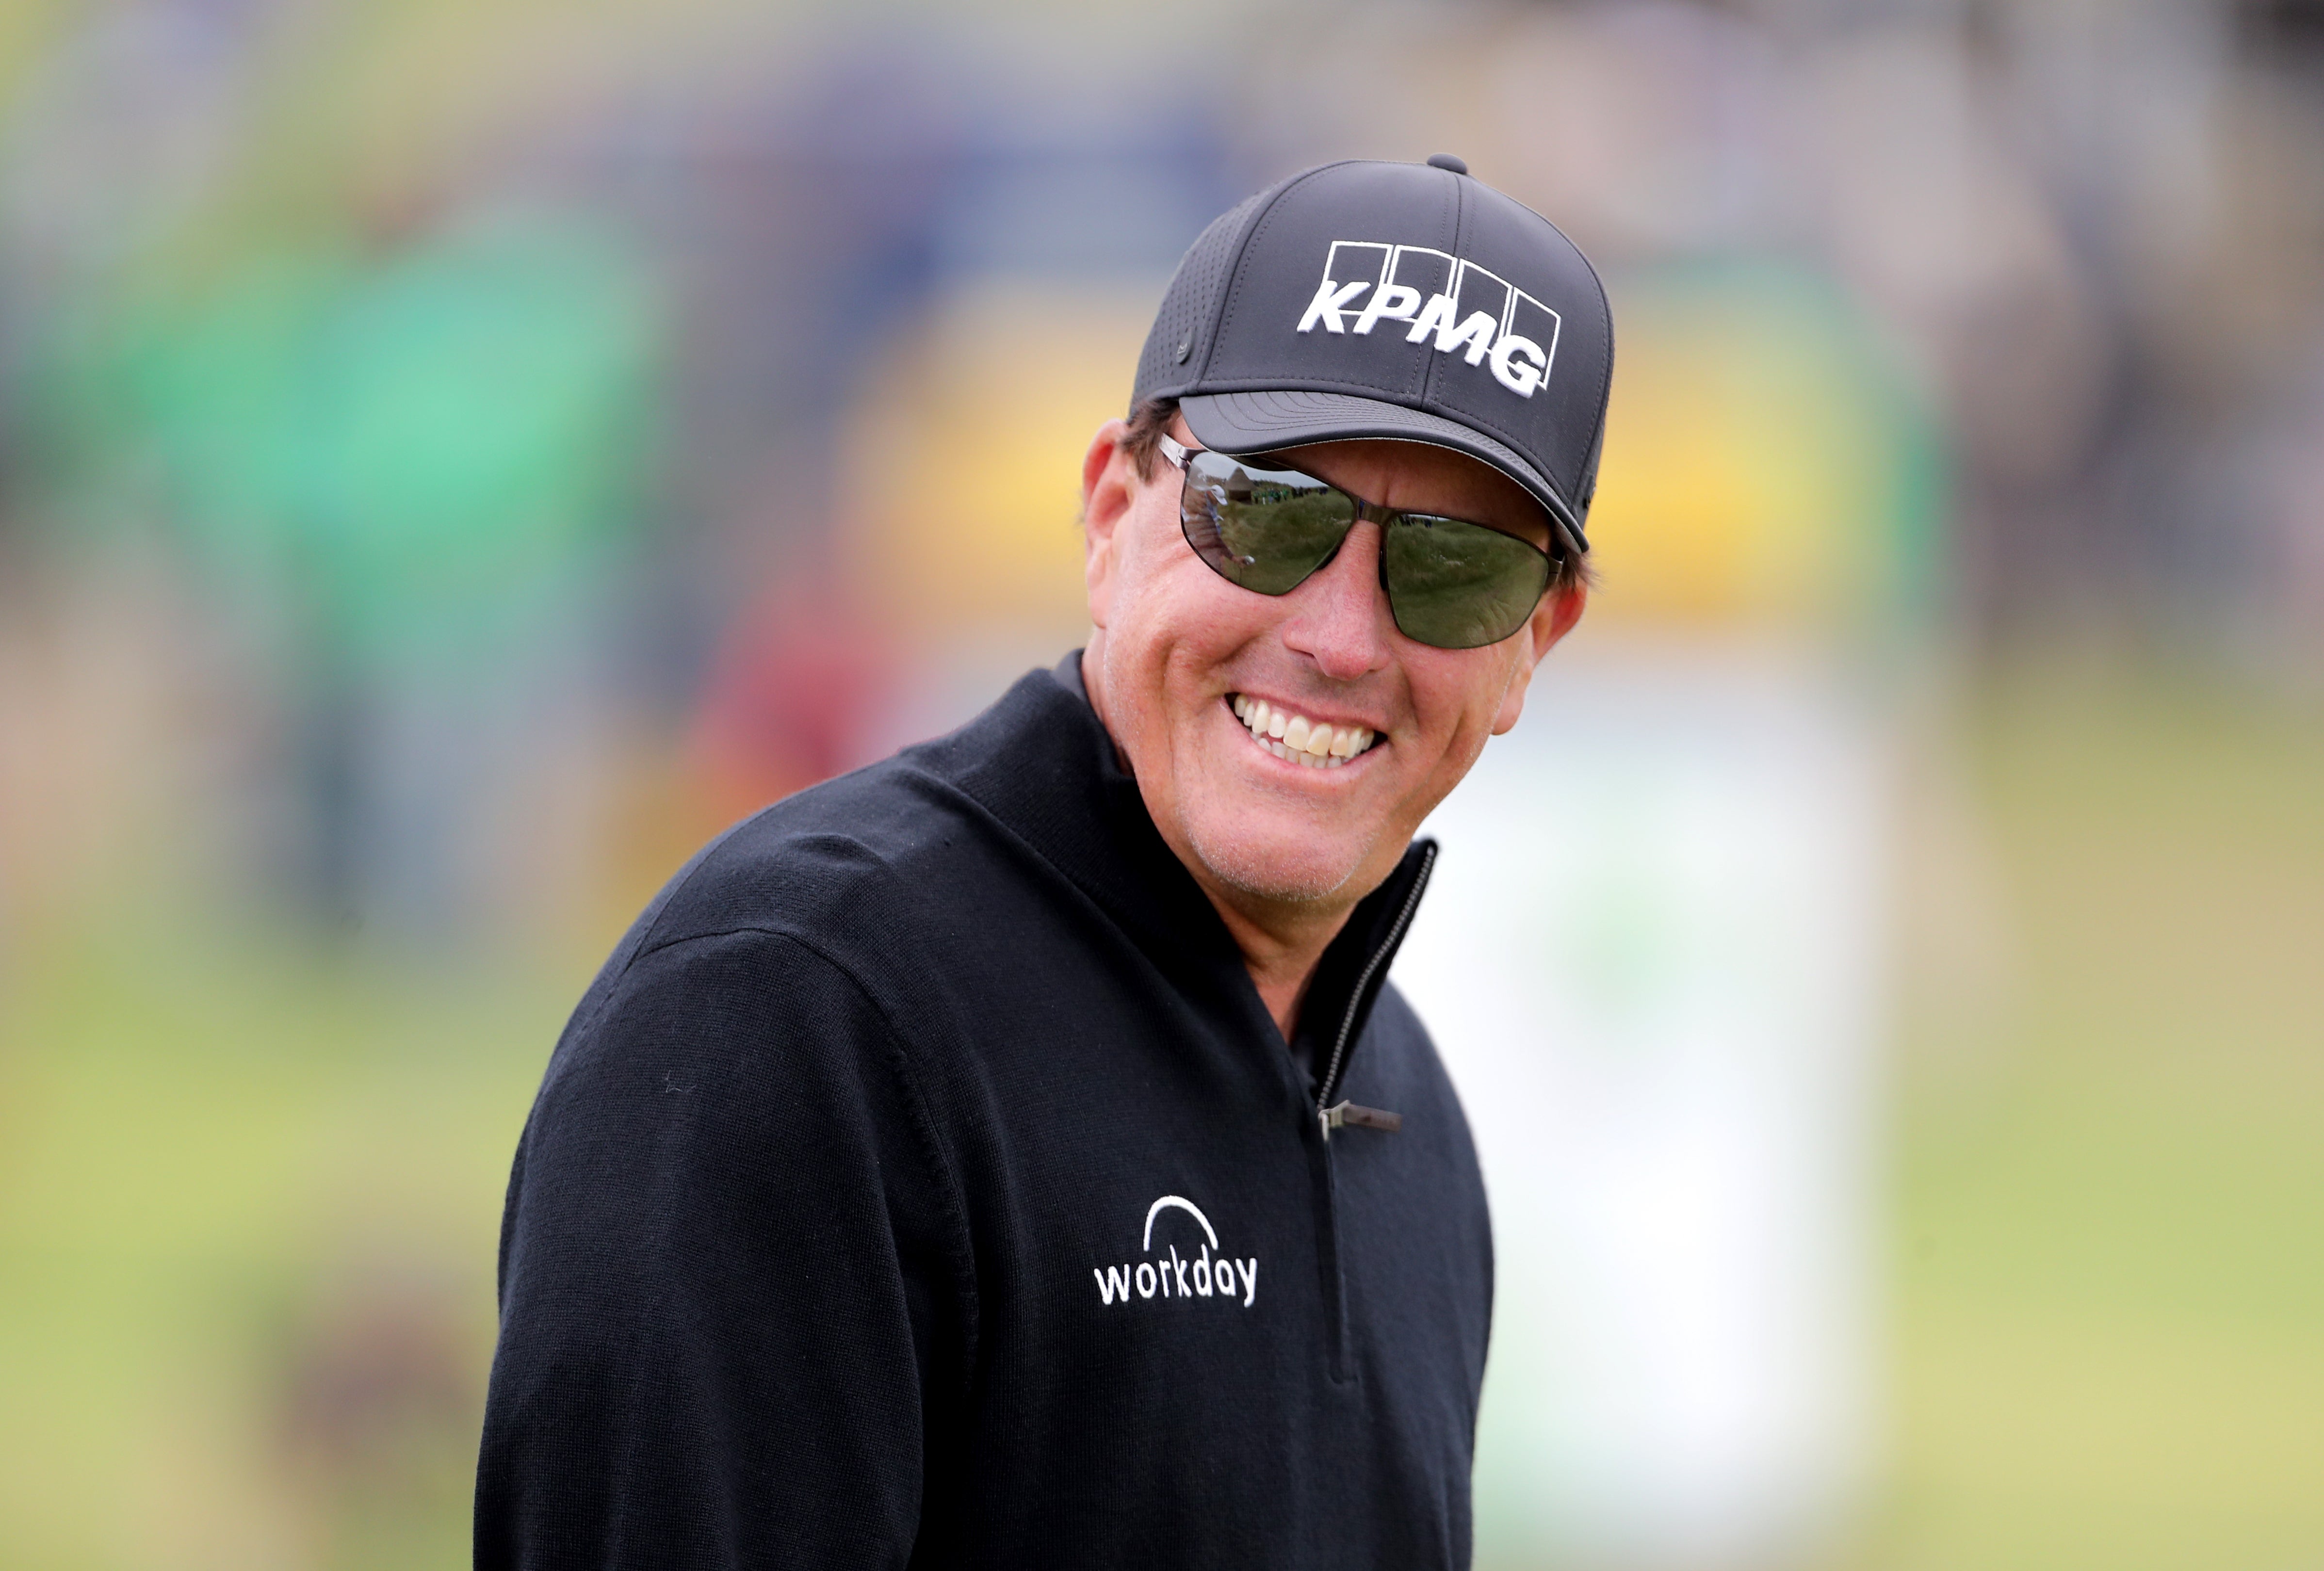 Mickelson has kept a low profile since February’s comments about the Saudis